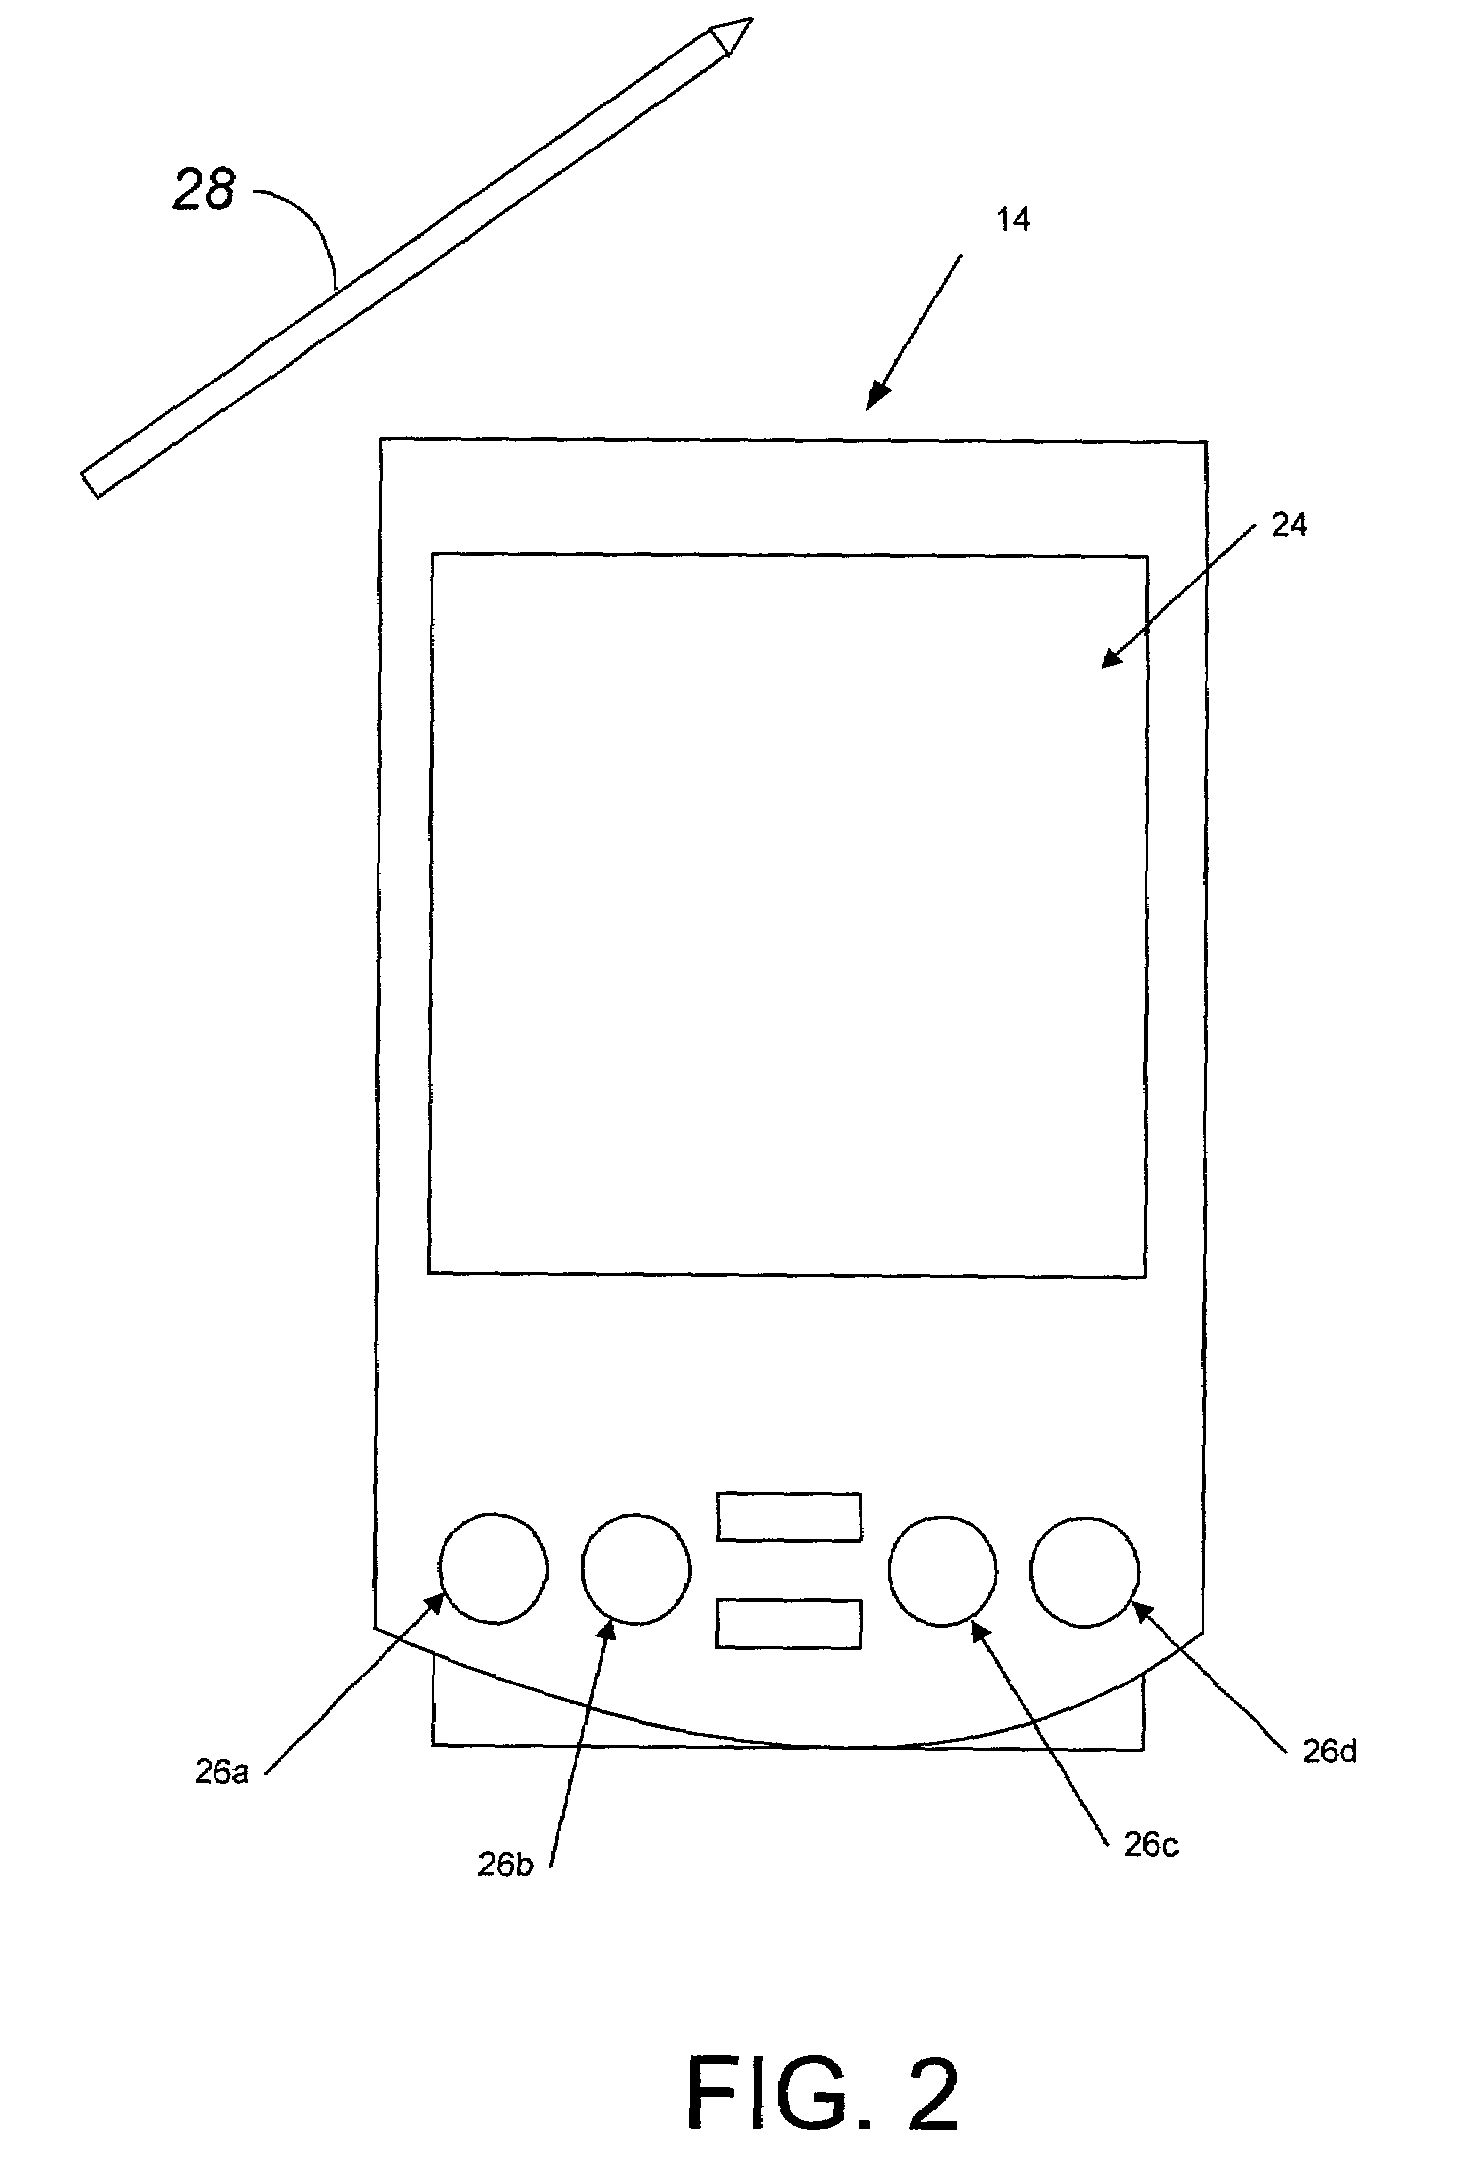 Handheld device graphical user interfaces for displaying patient medical records